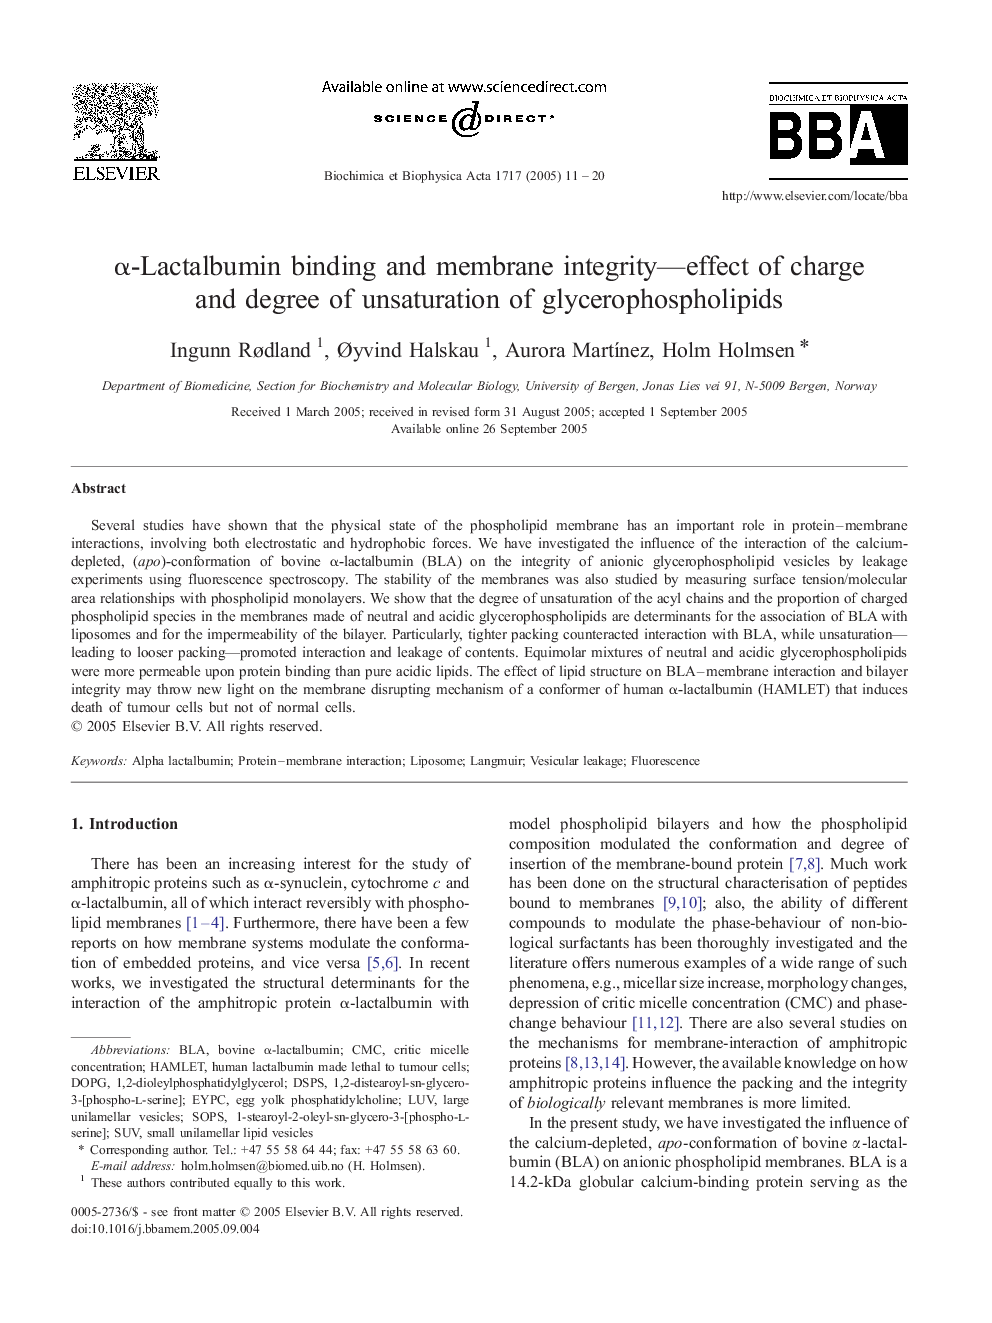 Î±-Lactalbumin binding and membrane integrity-effect of charge and degree of unsaturation of glycerophospholipids